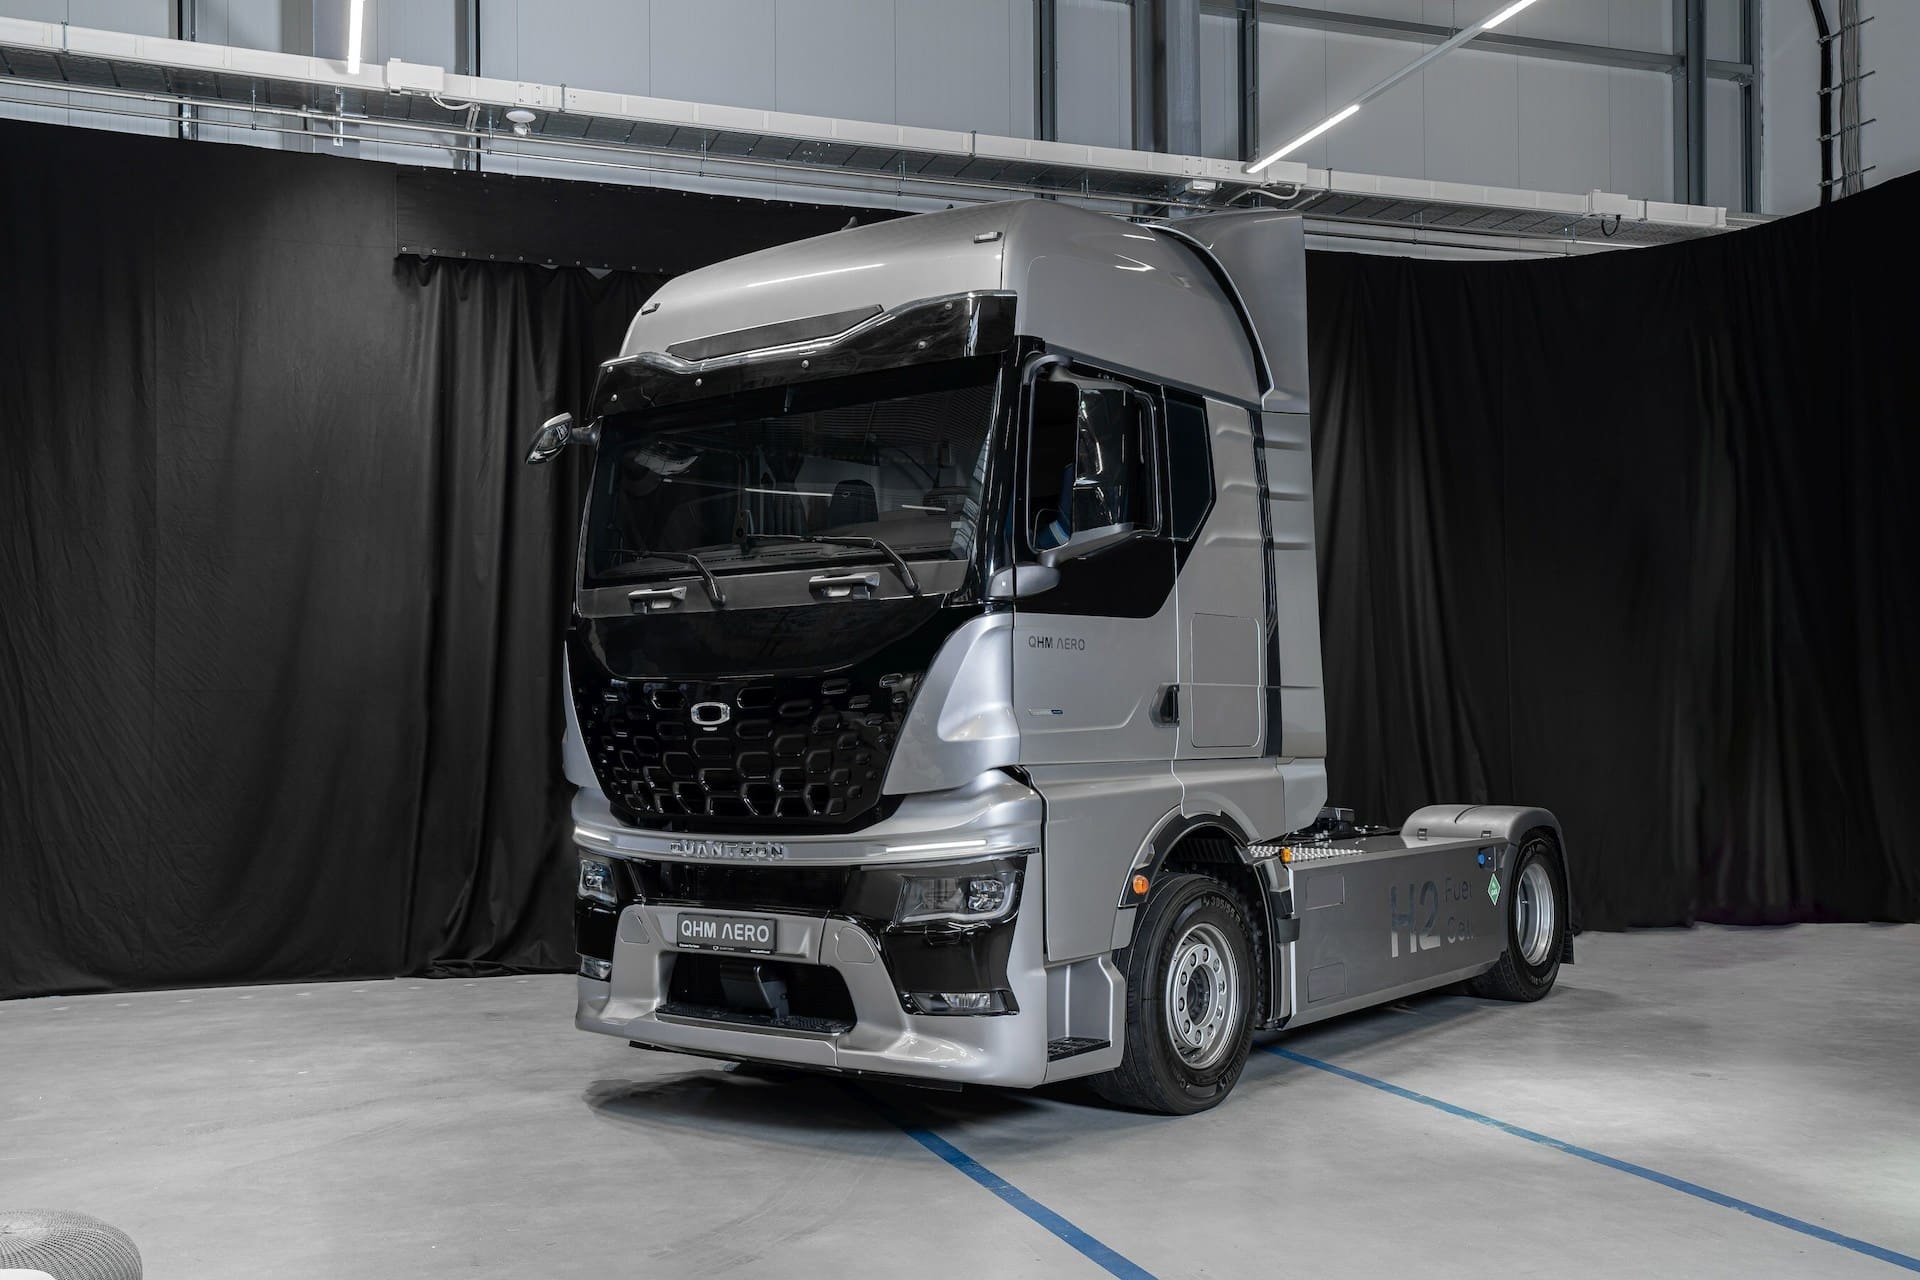 Quantron AG Showcases Emission-Free Solutions and Debuts Hydrogen-Electric Vehicle at Q-Days 2023